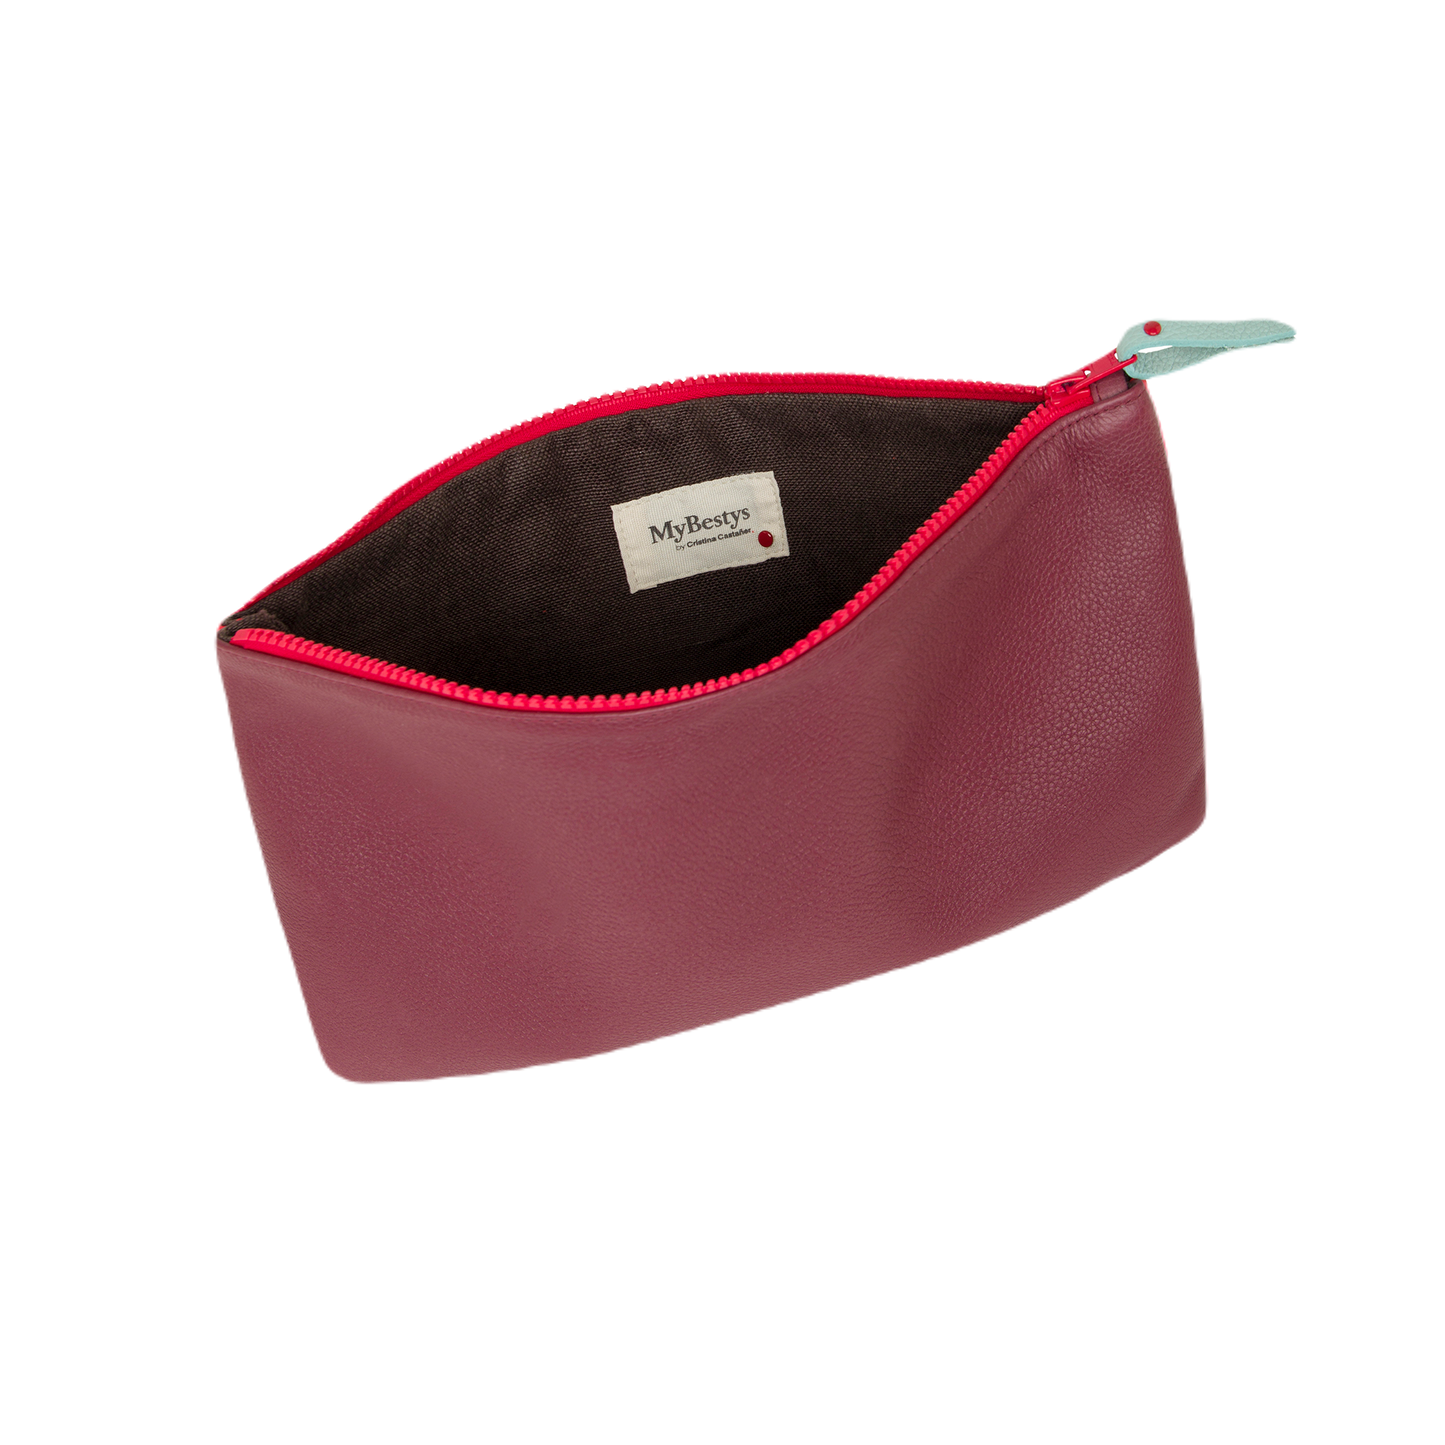 ZIP POUCH Blue and Maroon - S